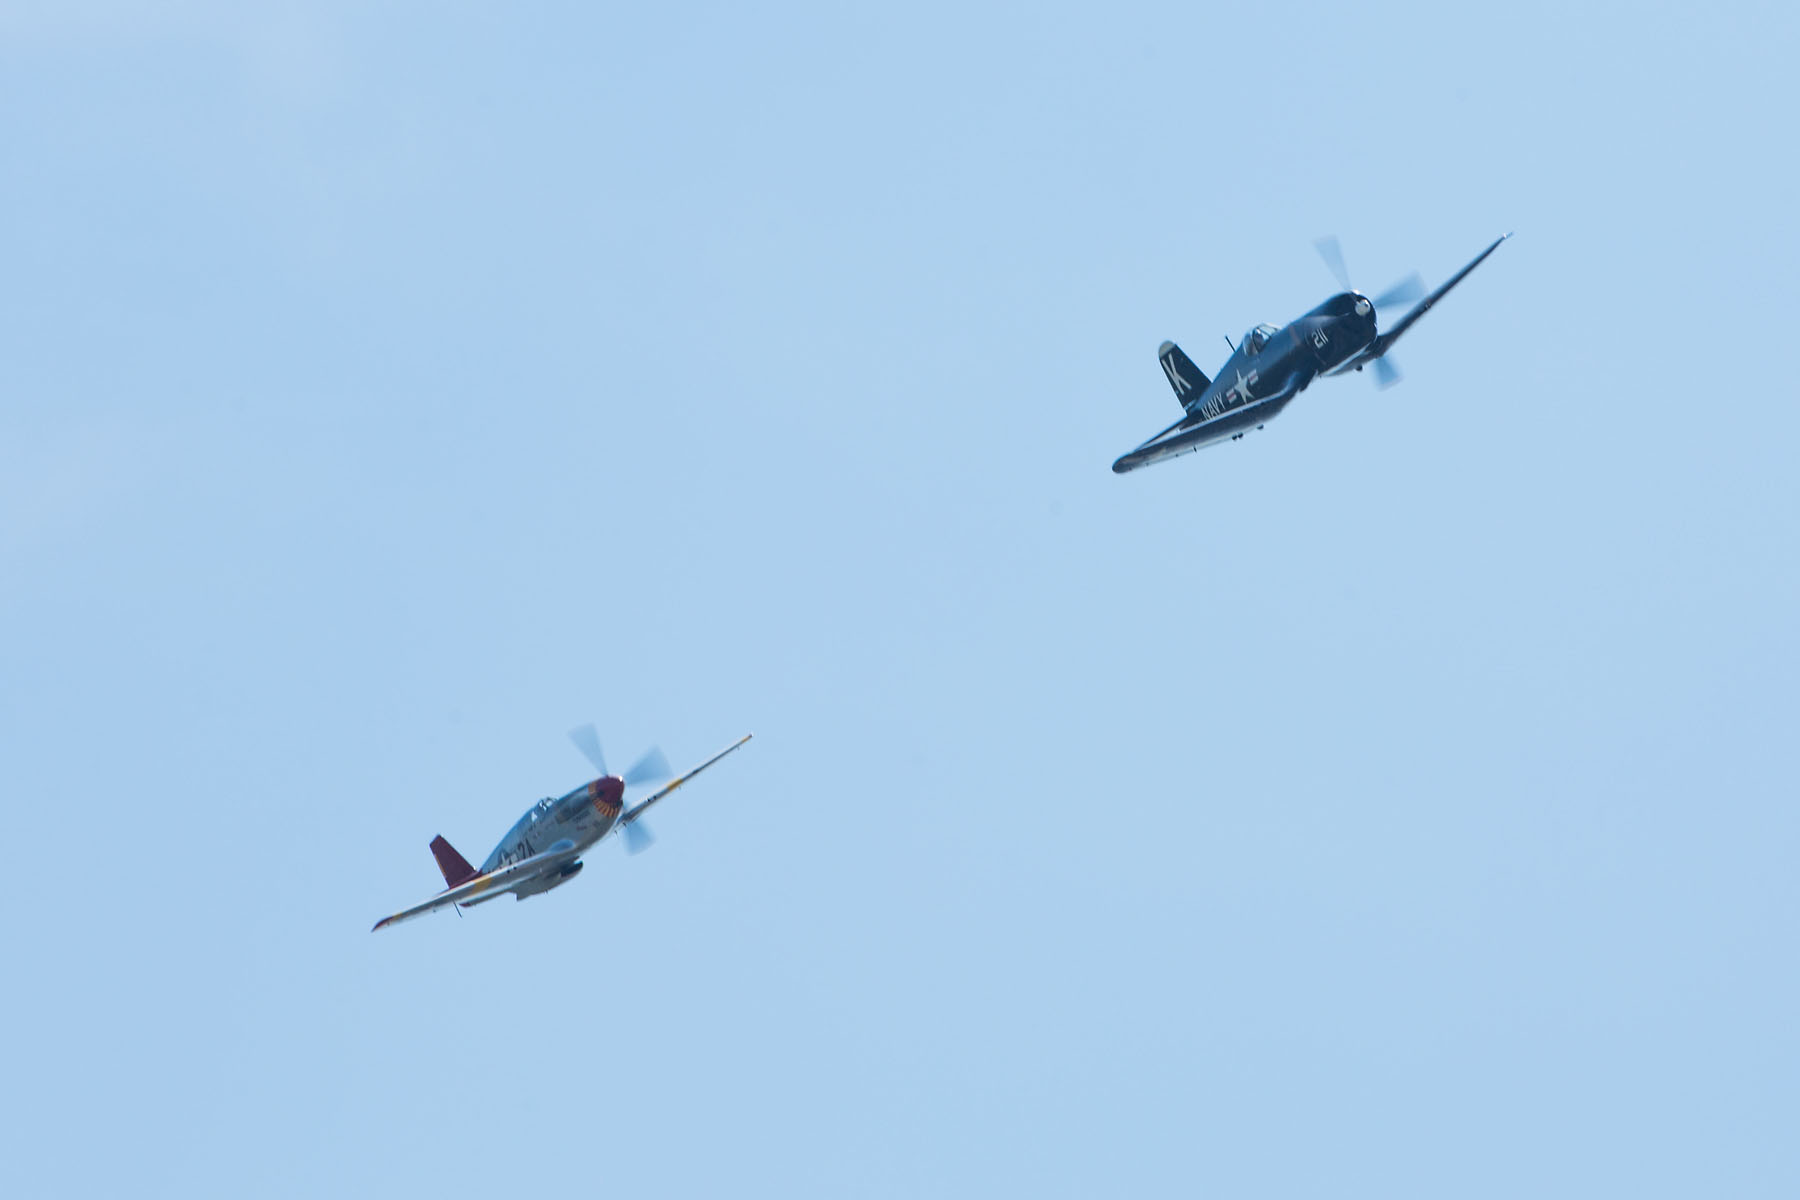 P-51 Mustang Red Tail chases F-4U Corsair, Sioux Falls Air Show, August 2019.  Click for next photo.